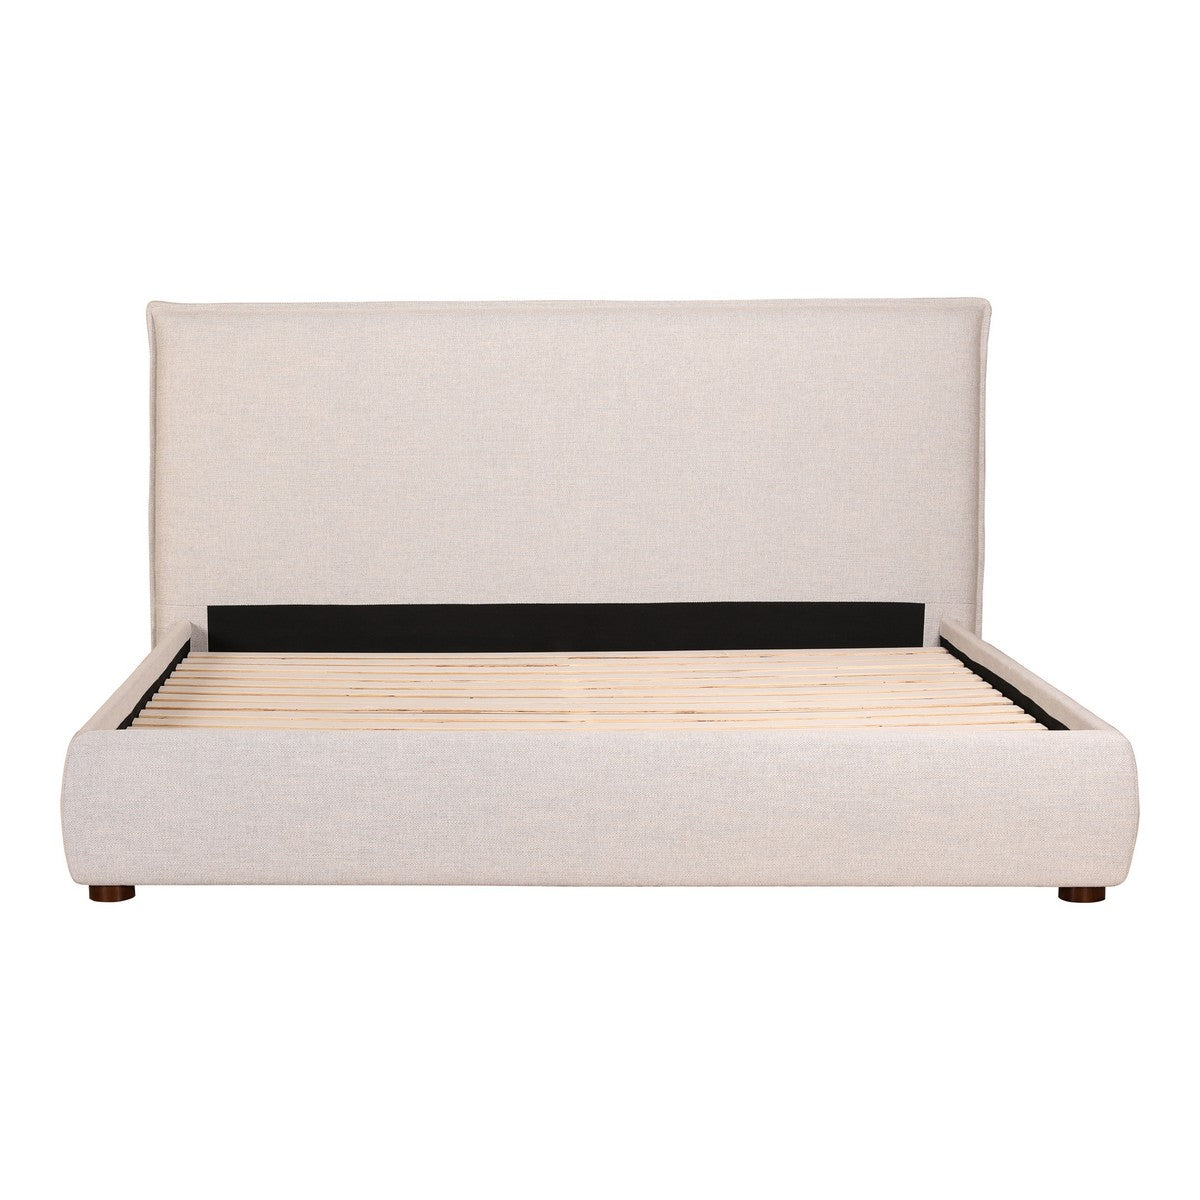 Moe's Home Collection Luzon King Bed Light Grey - RN-1130-40 - Moe's Home Collection - Beds - Minimal And Modern - 1